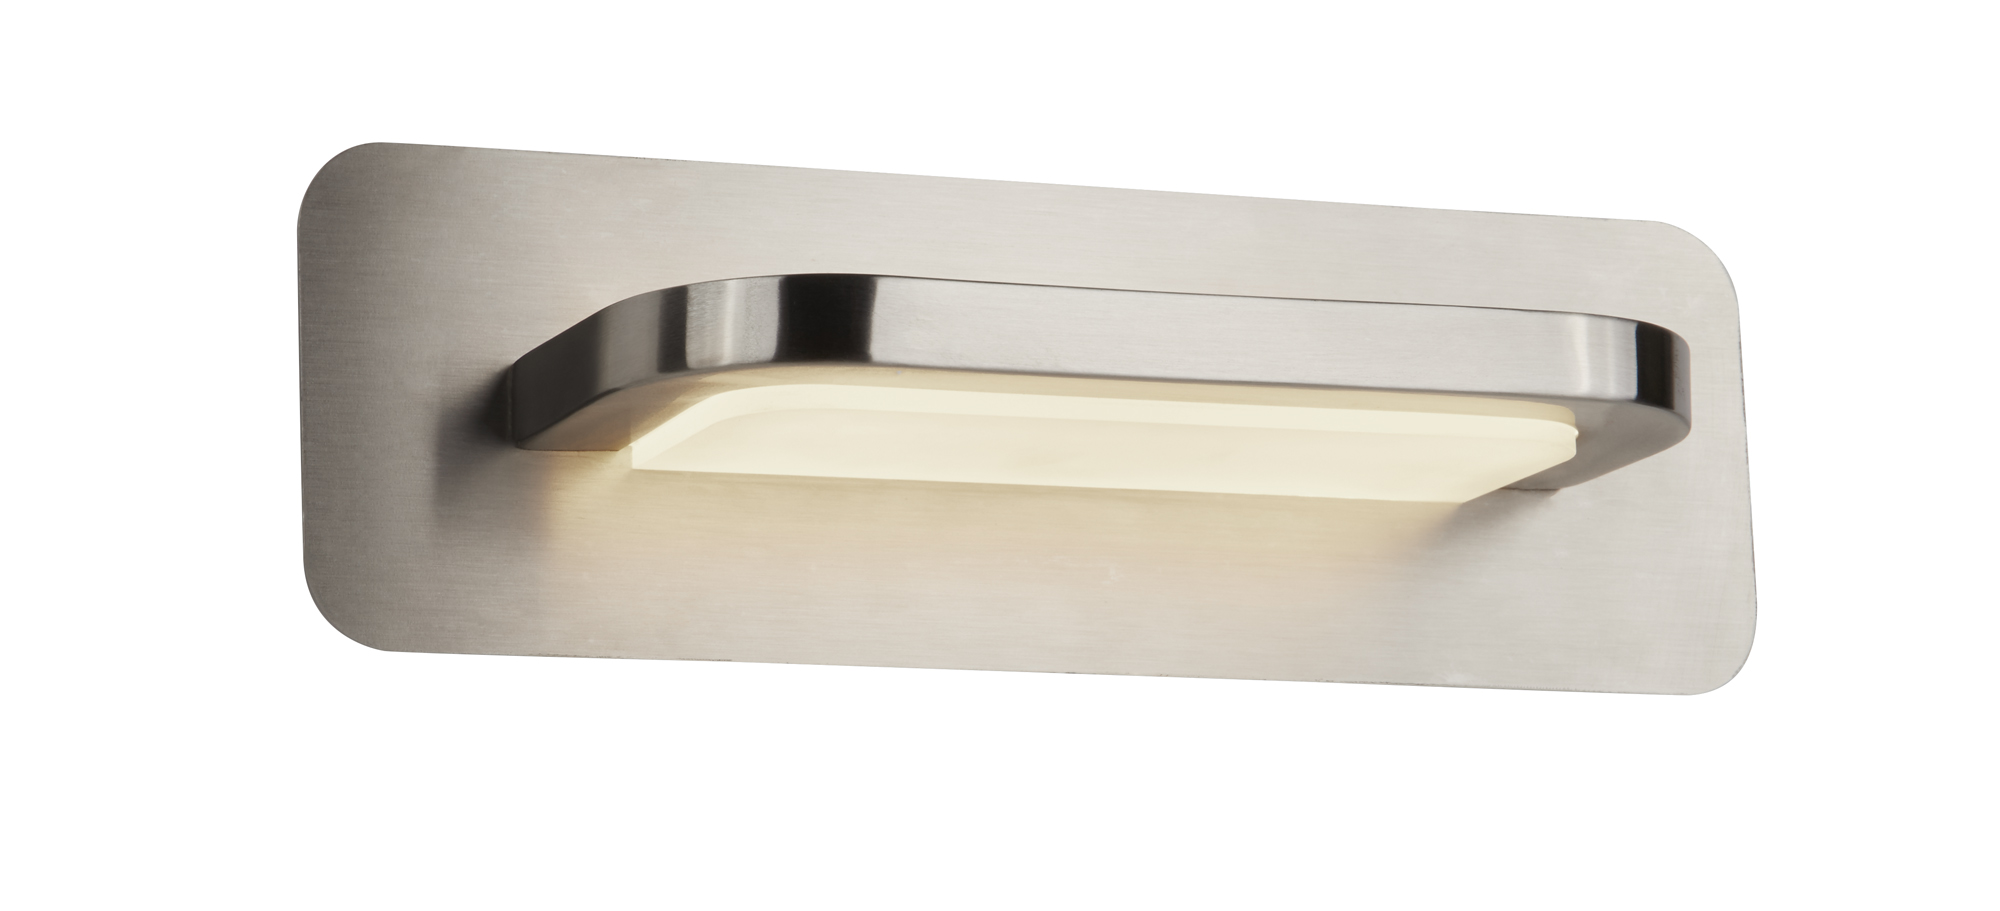 LED Wall Light - Satin Silver/Frosted Glass